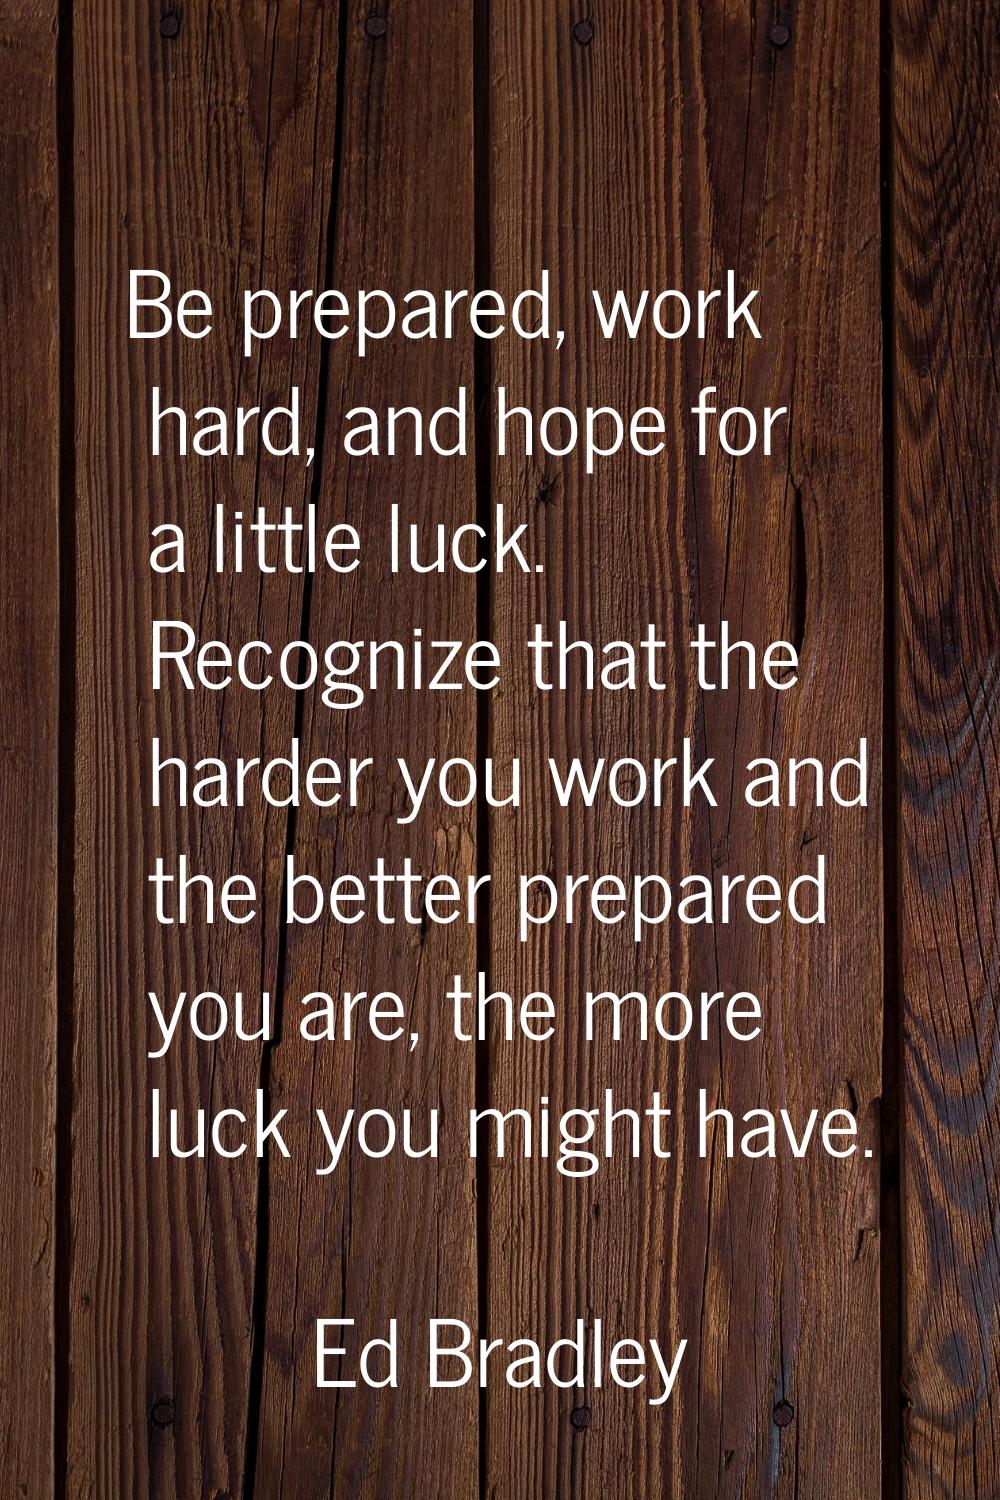 Be prepared, work hard, and hope for a little luck. Recognize that the harder you work and the bett